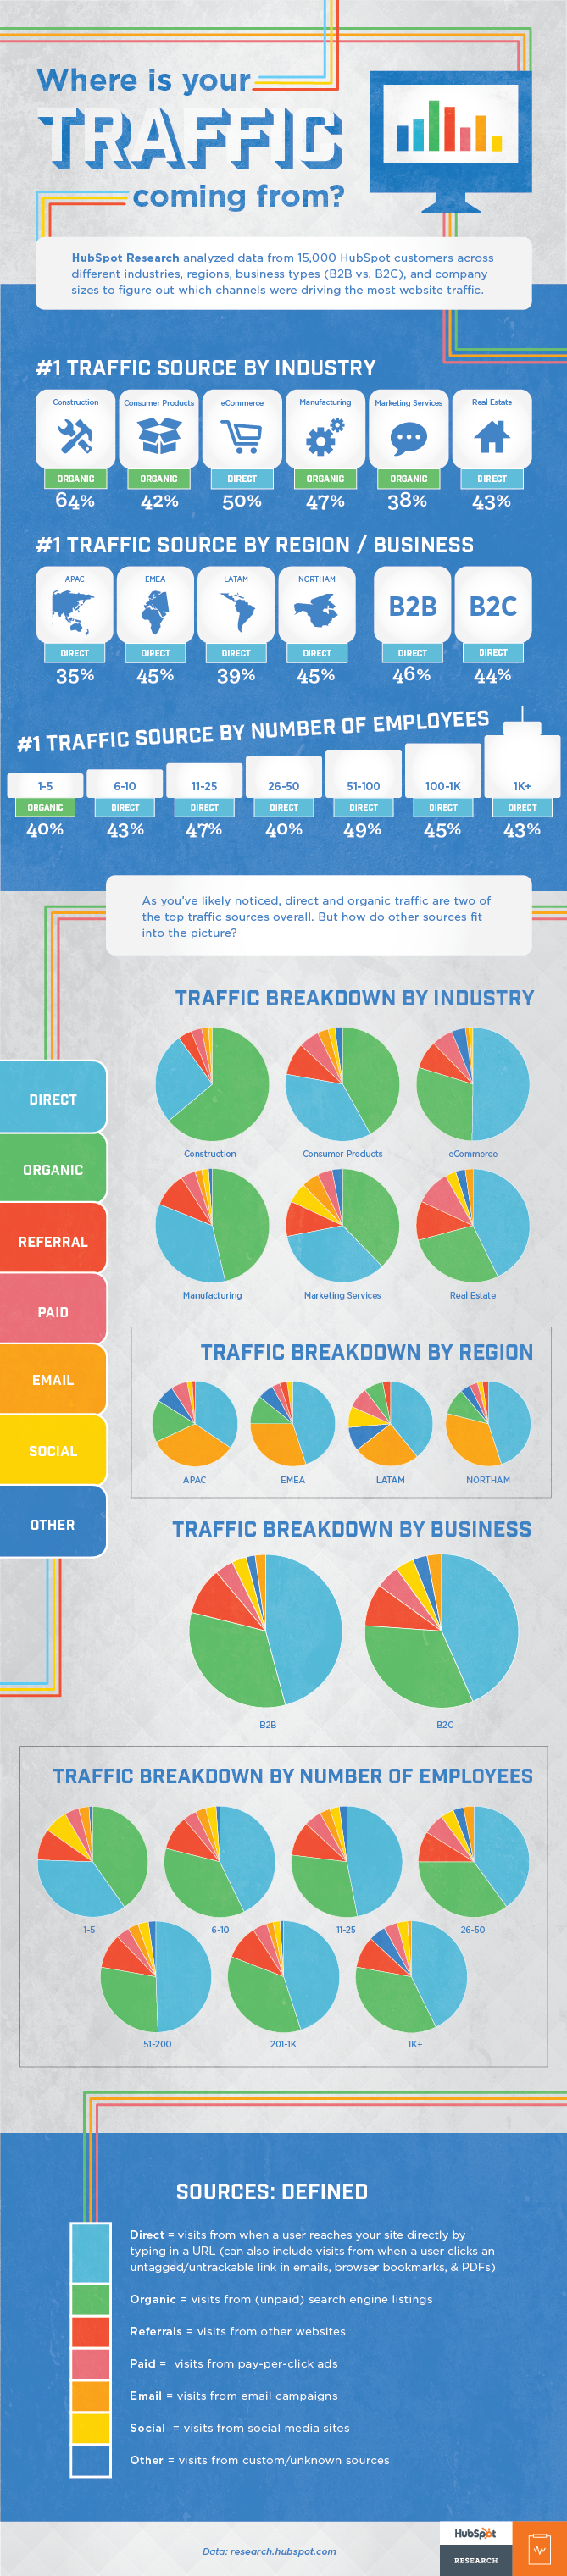 where-is-your-traffic-coming-from-infographic.png